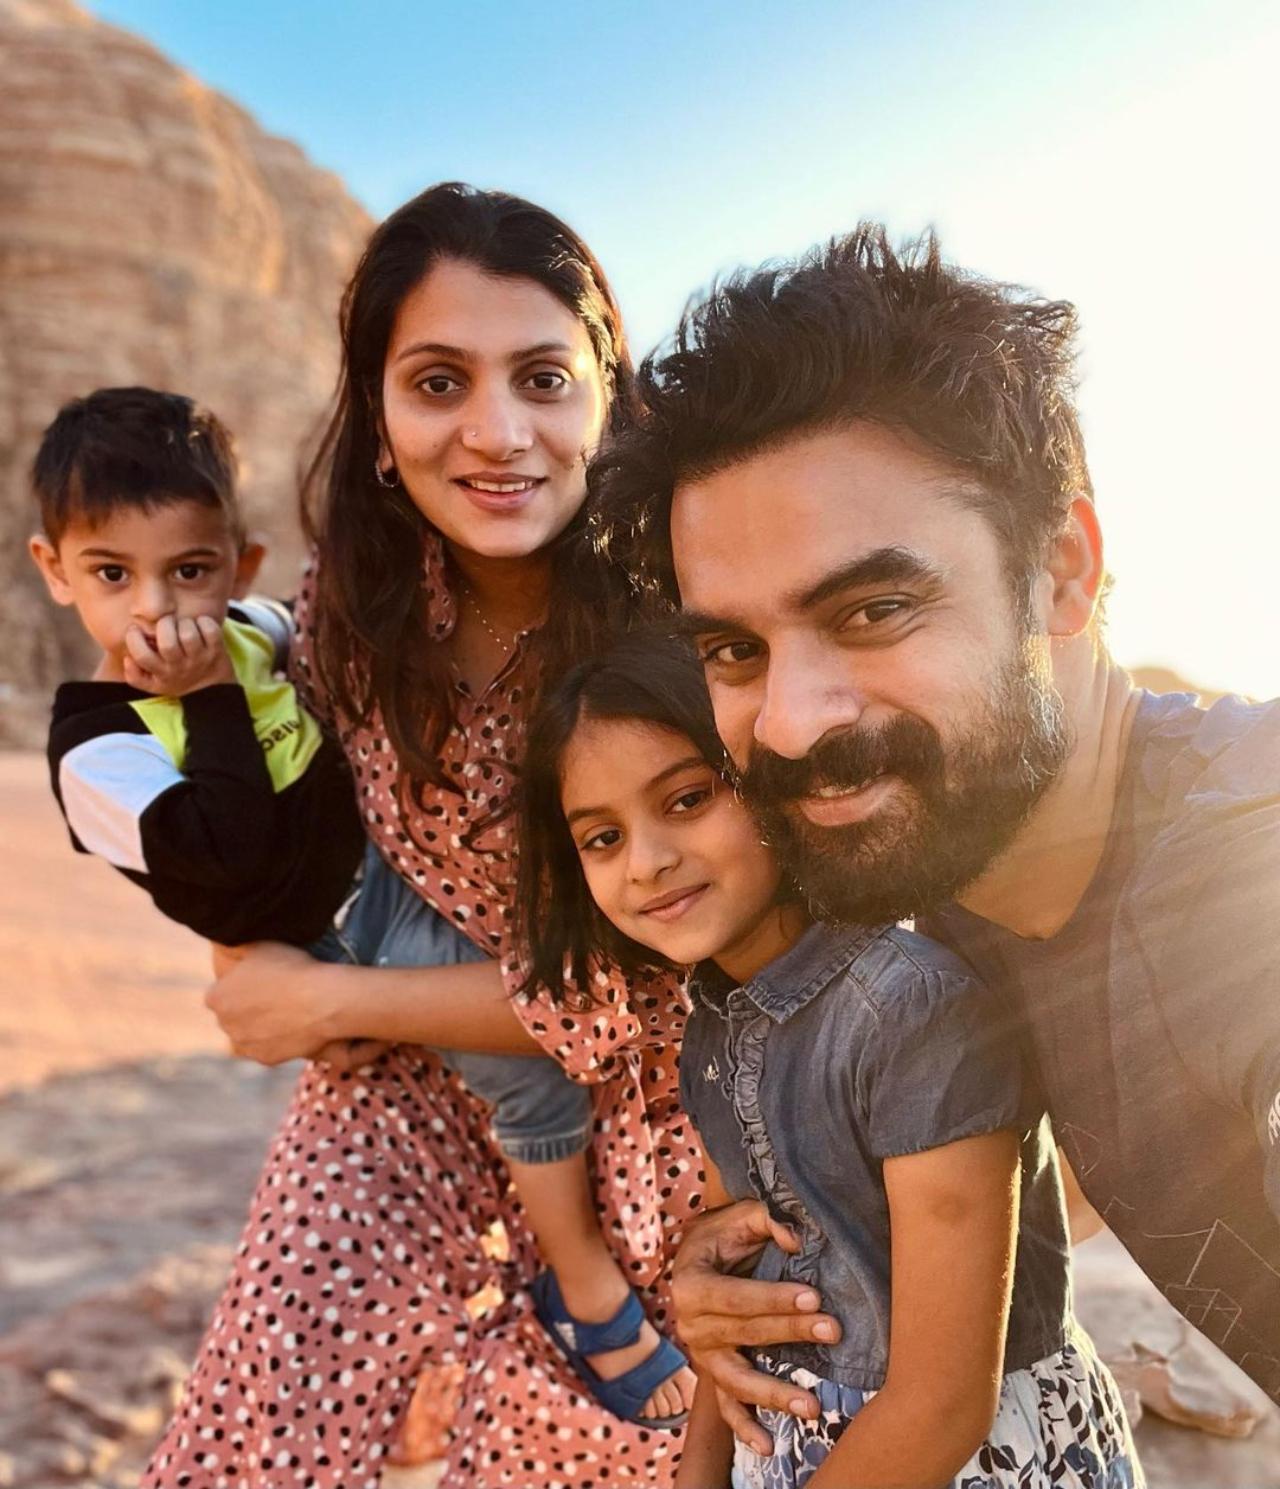 Actor Tovino Thomas is one of the biggest stars of Malayalam cinema today. The actor who married his childhood sweetheart, Lidiya, is father to two beautiful kids- Izza and Tahaan